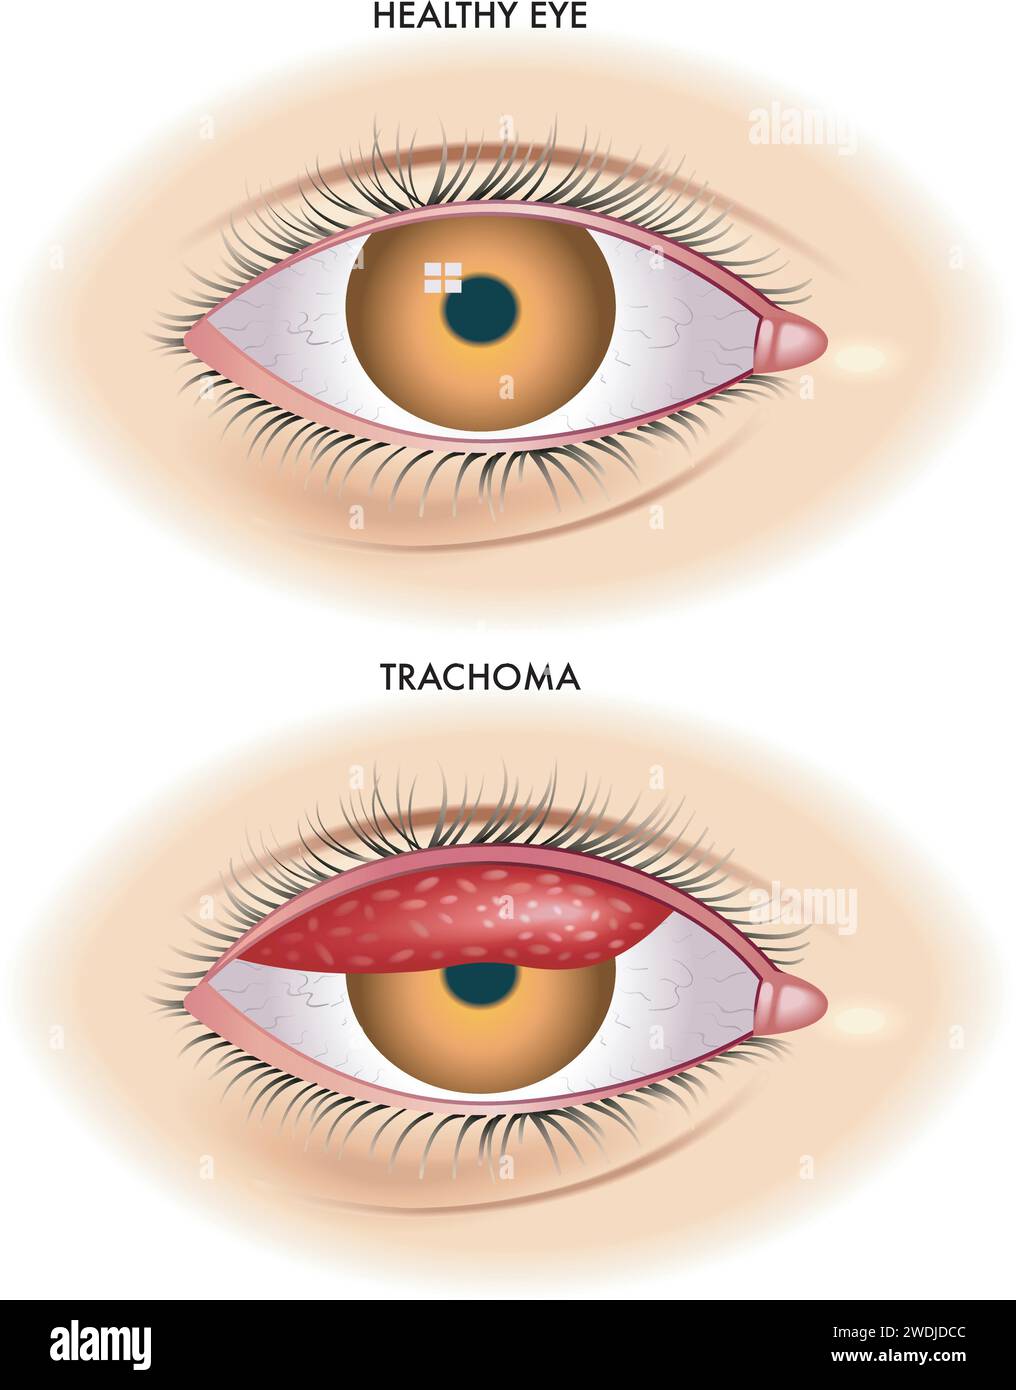 Medical illustration shows the comparison between a normal eye and one affected by trachoma an infectious disease caused by bacterium Chlamydia  trach Stock Vector